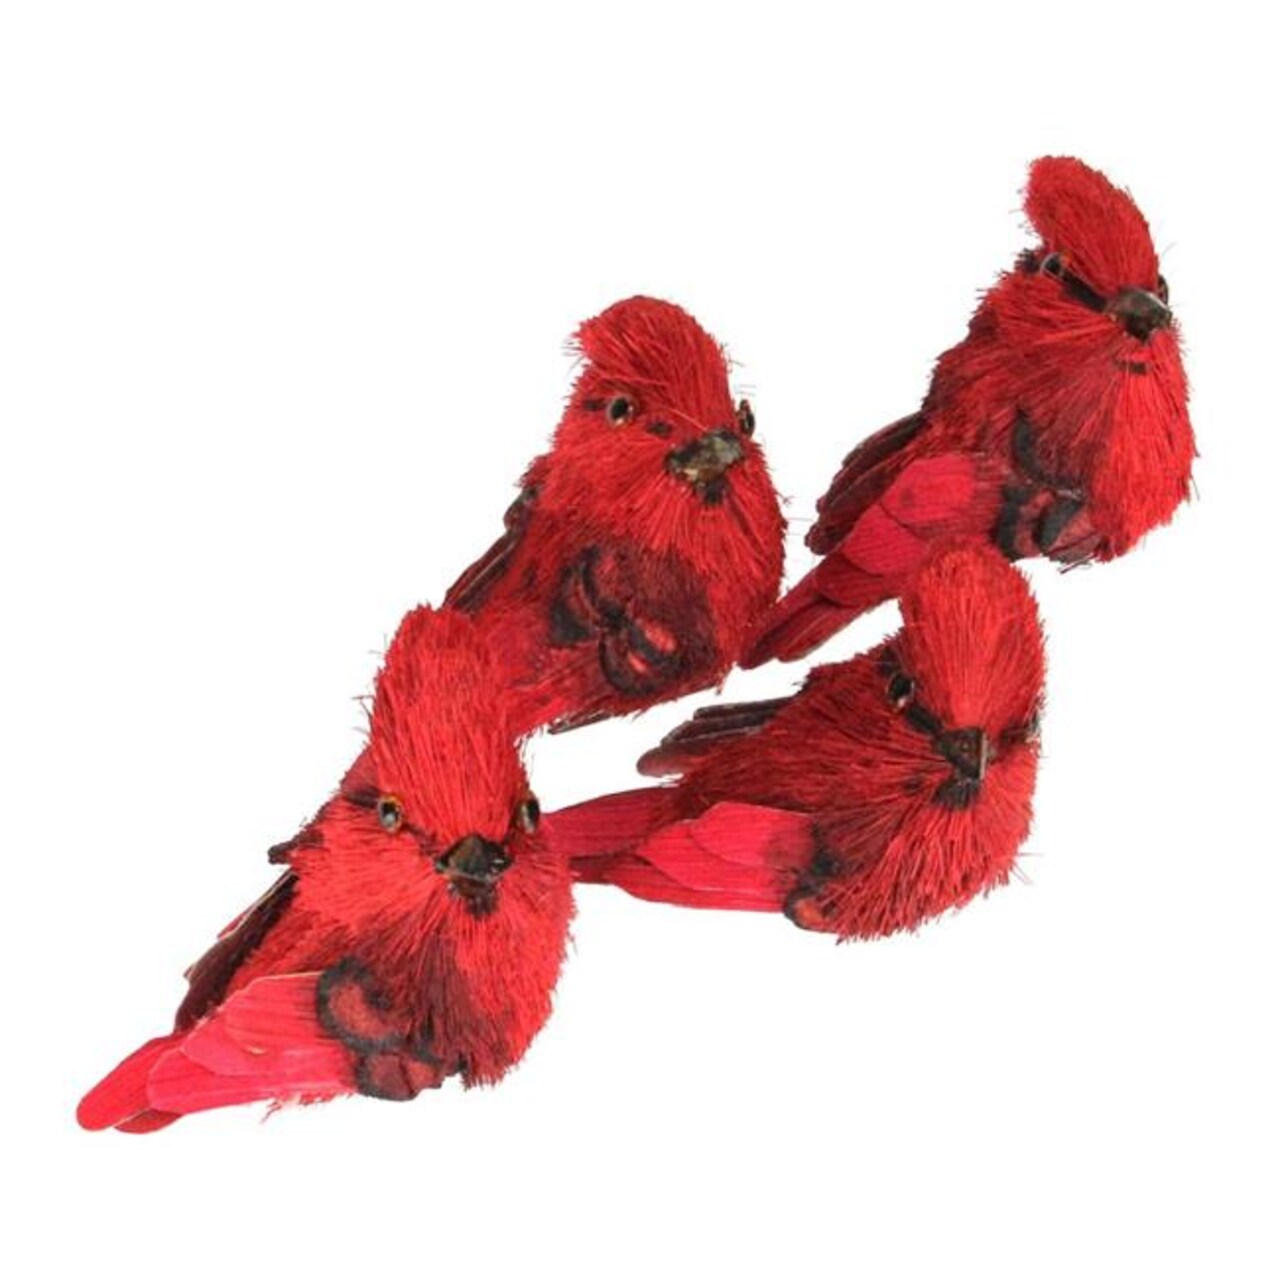 Northlight 32636962 3.25 in. Red Cardinal Clip-On Bird Christmas Figure Ornaments - Pack of 4